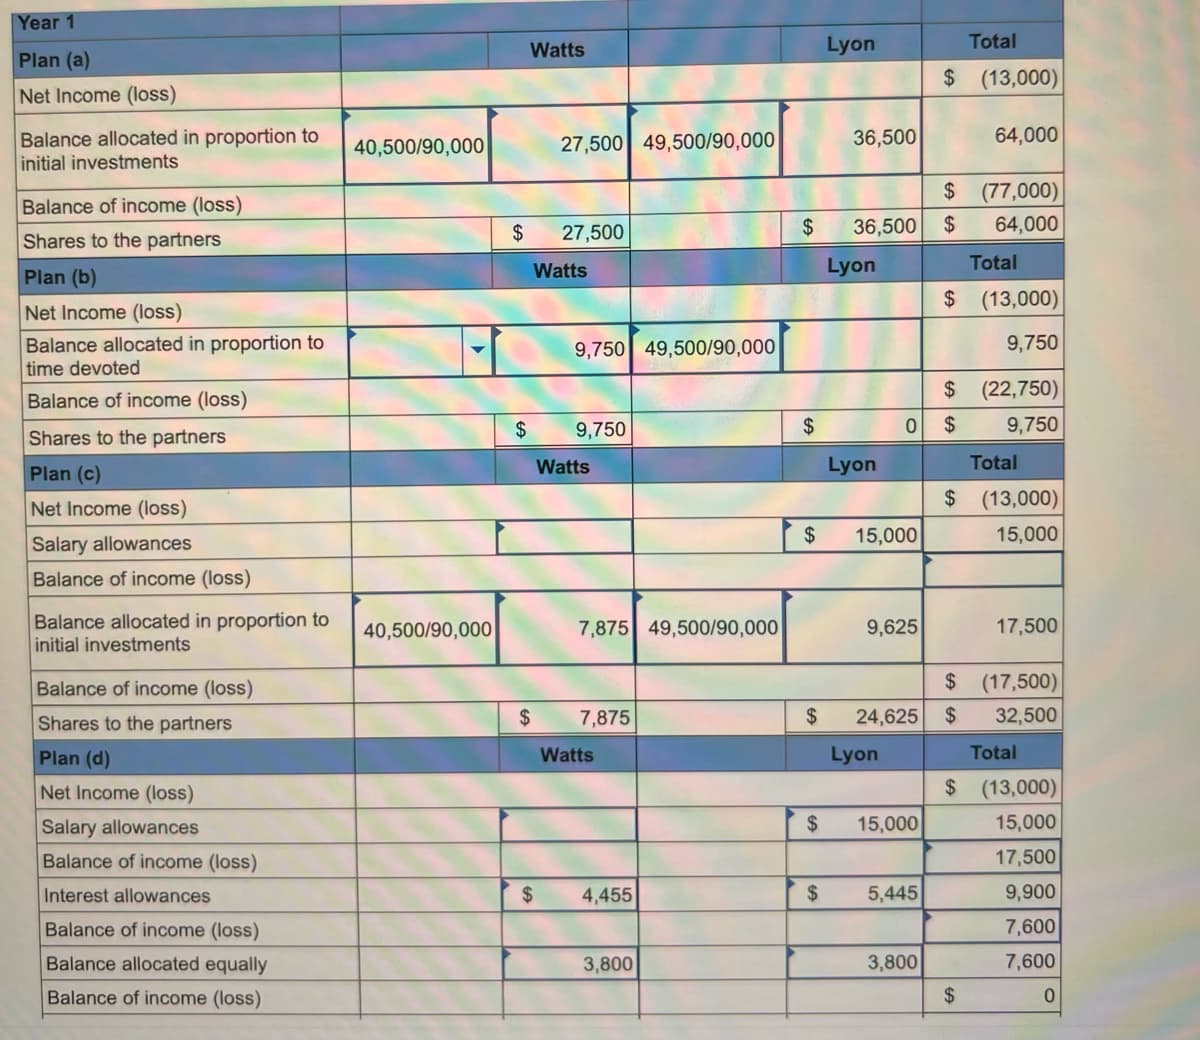 Year 1
Plan (a)
Net Income (loss)
Balance allocated in proportion to
initial investments
Balance of income (loss)
Shares to the partners
Plan (b)
Net Income (loss)
Balance allocated in proportion to
time devoted
Balance of income (loss)
Shares to the partners
Plan (c)
Net Income (loss)
Salary allowances
Balance of income (loss)
Balance allocated in proportion to
initial investments
Balance of income (loss)
Shares to the partners
Plan (d)
Net Income (loss)
Salary allowances
Balance of income (loss)
Interest allowances
Balance of income (loss)
Balance allocated equally
Balance of income (loss)
40,500/90,000
40,500/90,000
$
$
Watts
$
27,500 49,500/90,000
27,500
Watts
9,750 49,500/90,000
9,750
Watts
7,875 49,500/90,000
7,875
Watts
$ 4,455
3,800
$
$
$
$
$
$
Lyon
36,500
36,500 $
Lyon
Lyon
0
15,000
9,625
24,625
Lyon
Total
$ (13,000)
64,000
$ (77,000)
64,000
Total
$ (13,000)
9,750
$ (22,750)
$
9,750
Total
$ (13,000)
15,000
17,500
$ (17,500)
$ 32,500
Total
$ (13,000)
15,000
17,500
9,900
7,600
7,600
0
15,000
5,445
3,800
$